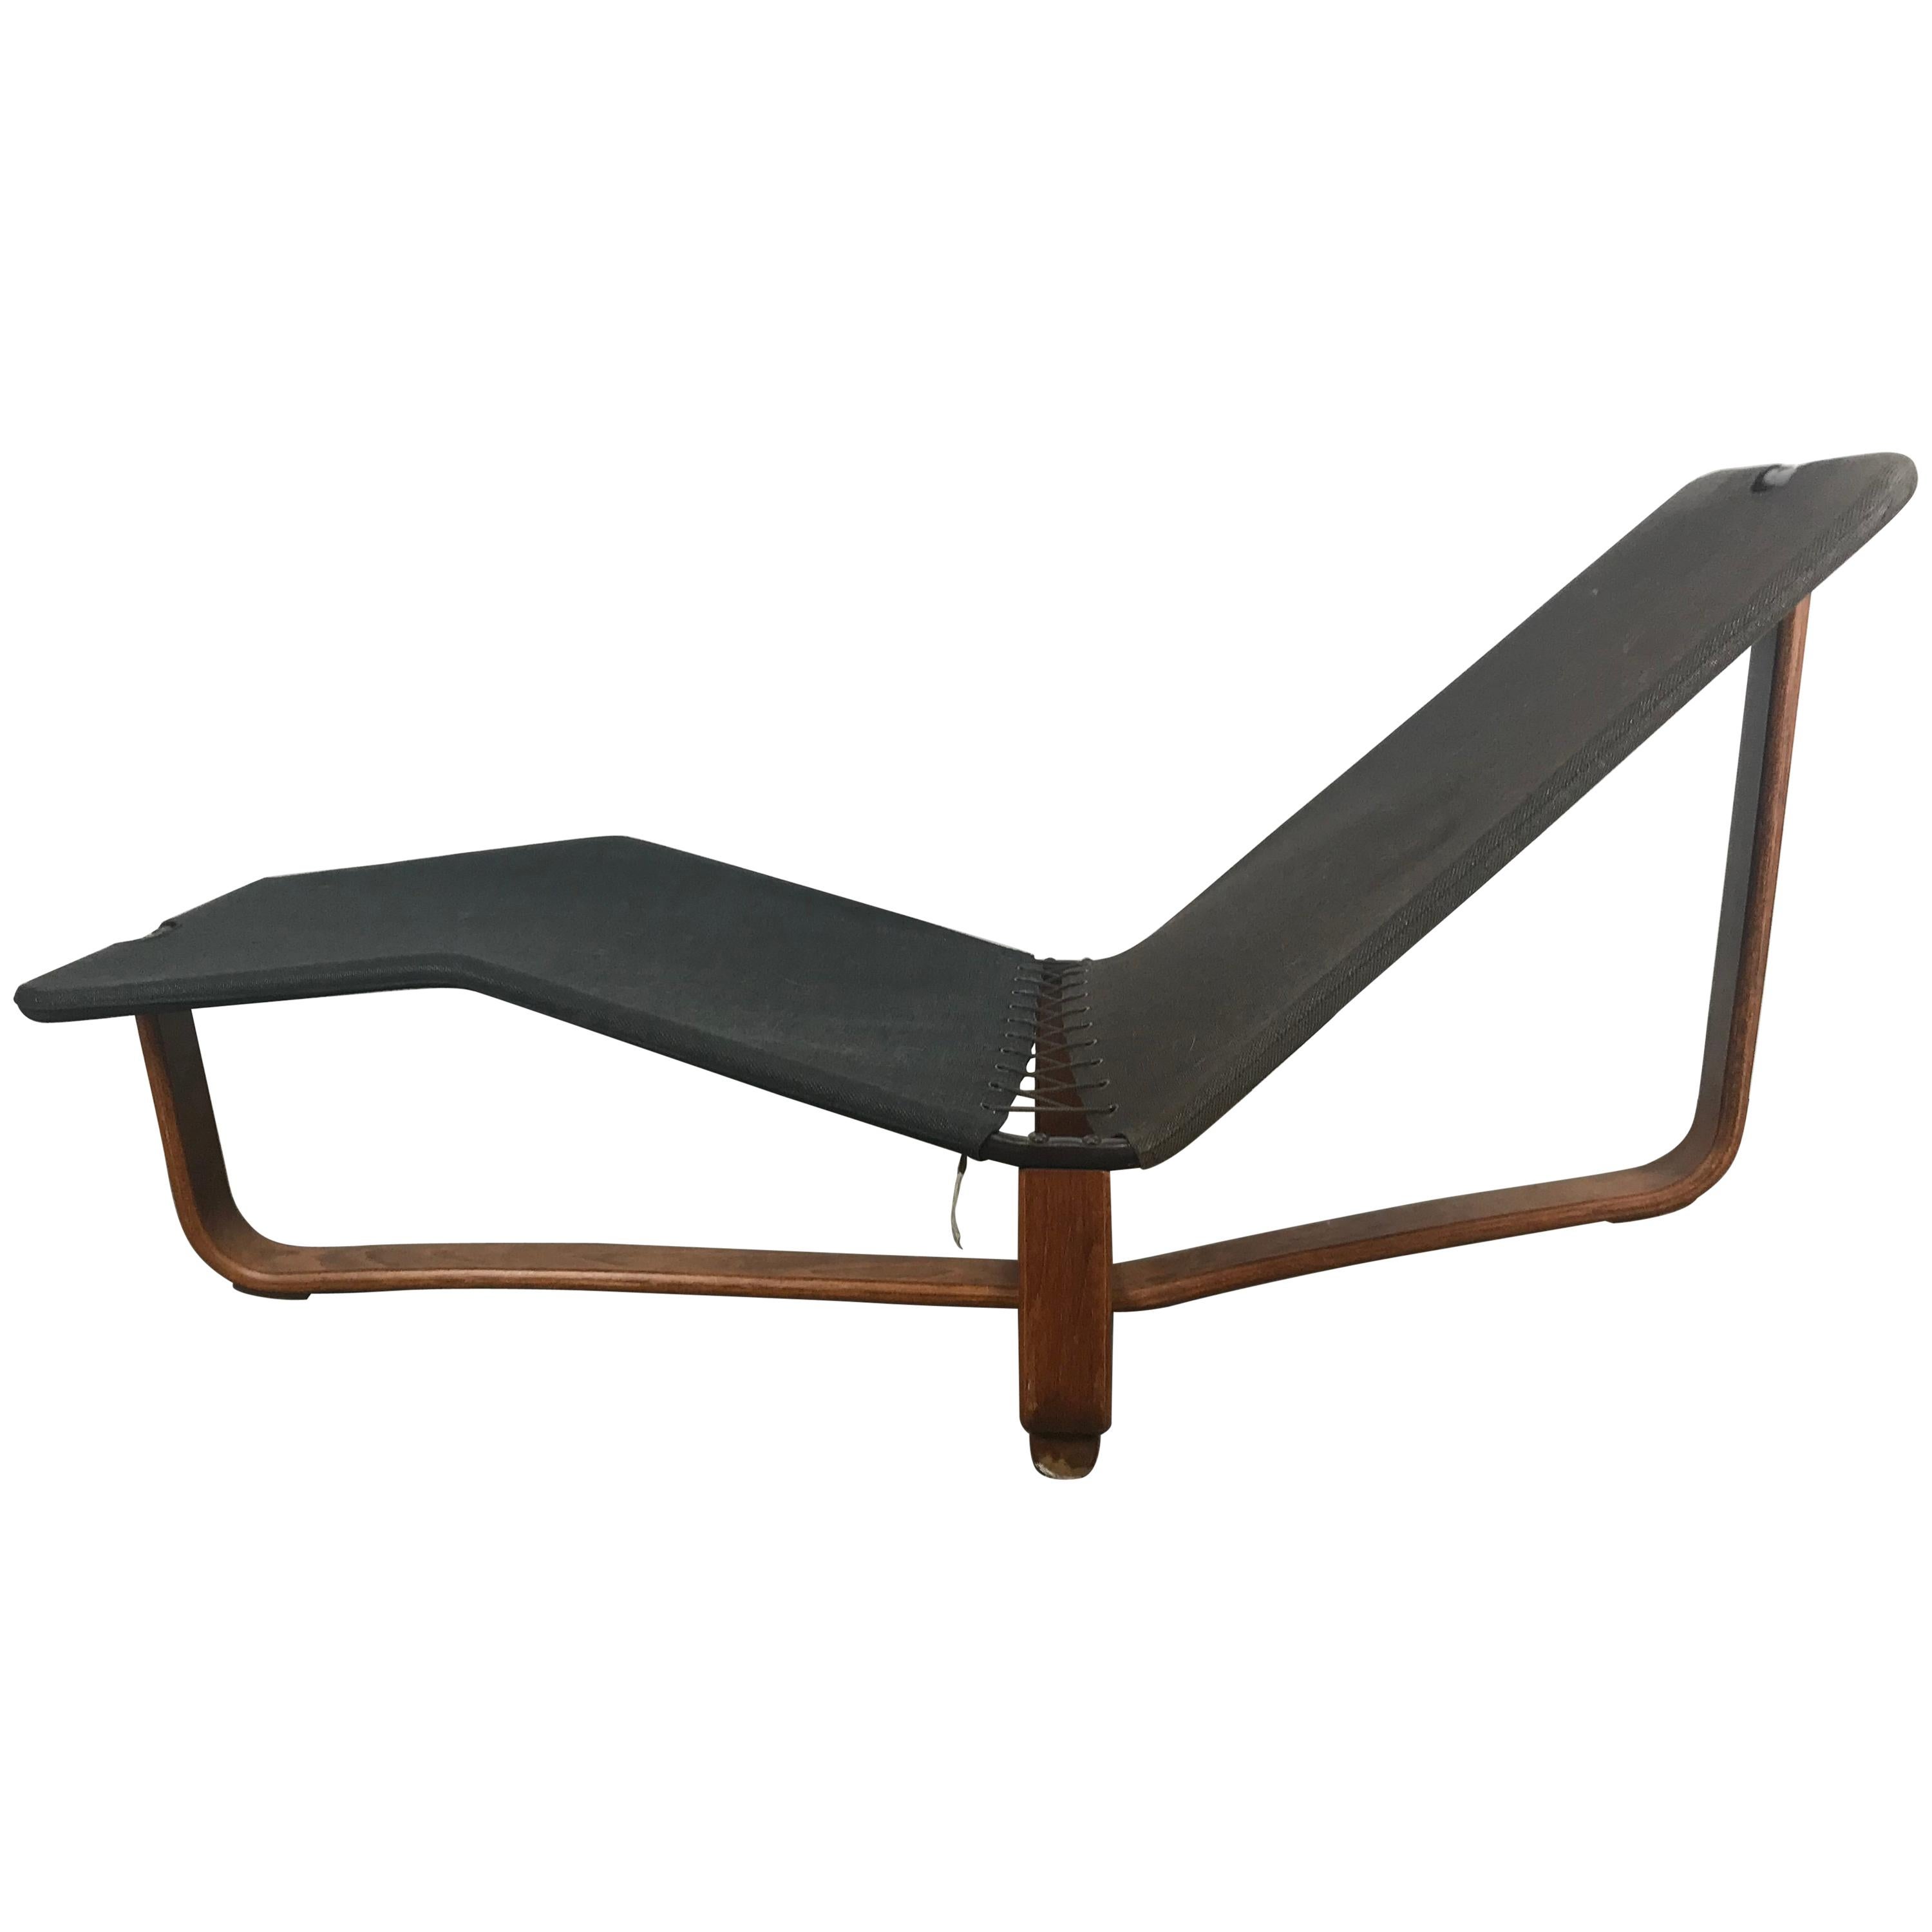 Modernist Bentwood Chaise Lounge by Ingmar & Knut Relling